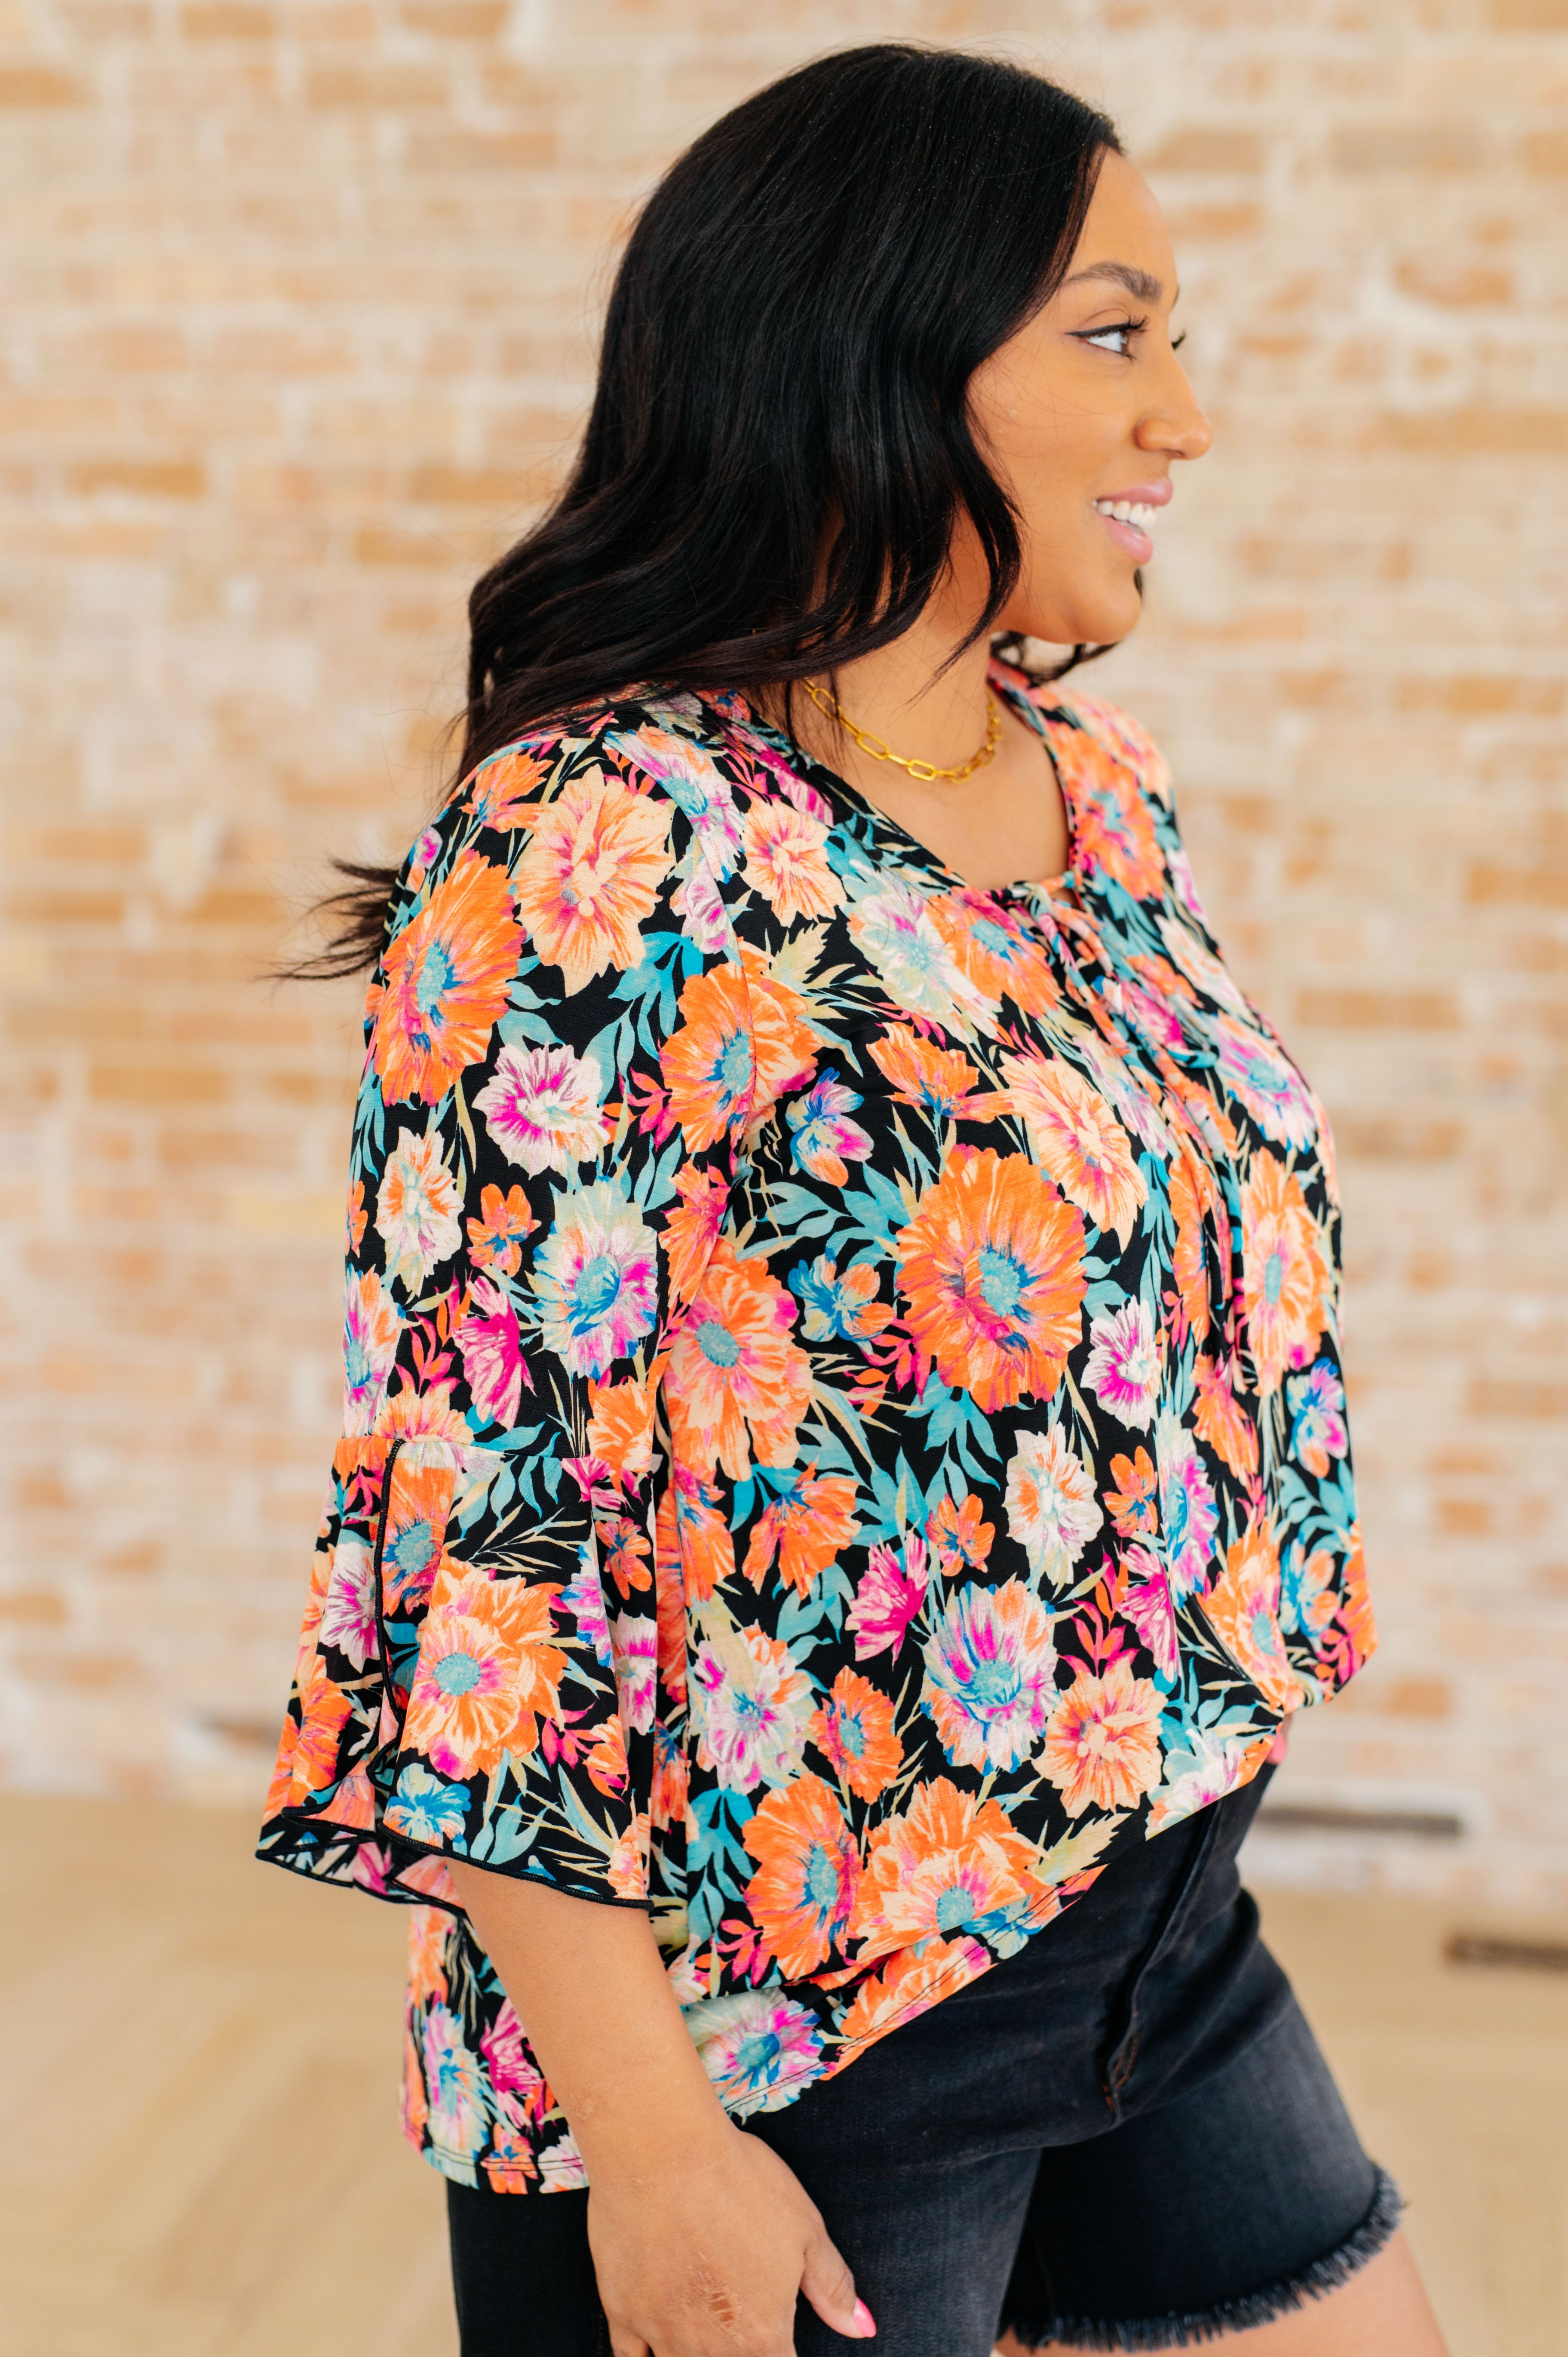 Dear Scarlett Willow Bell Sleeve Top in Black and Persimmon Floral Ave Shops